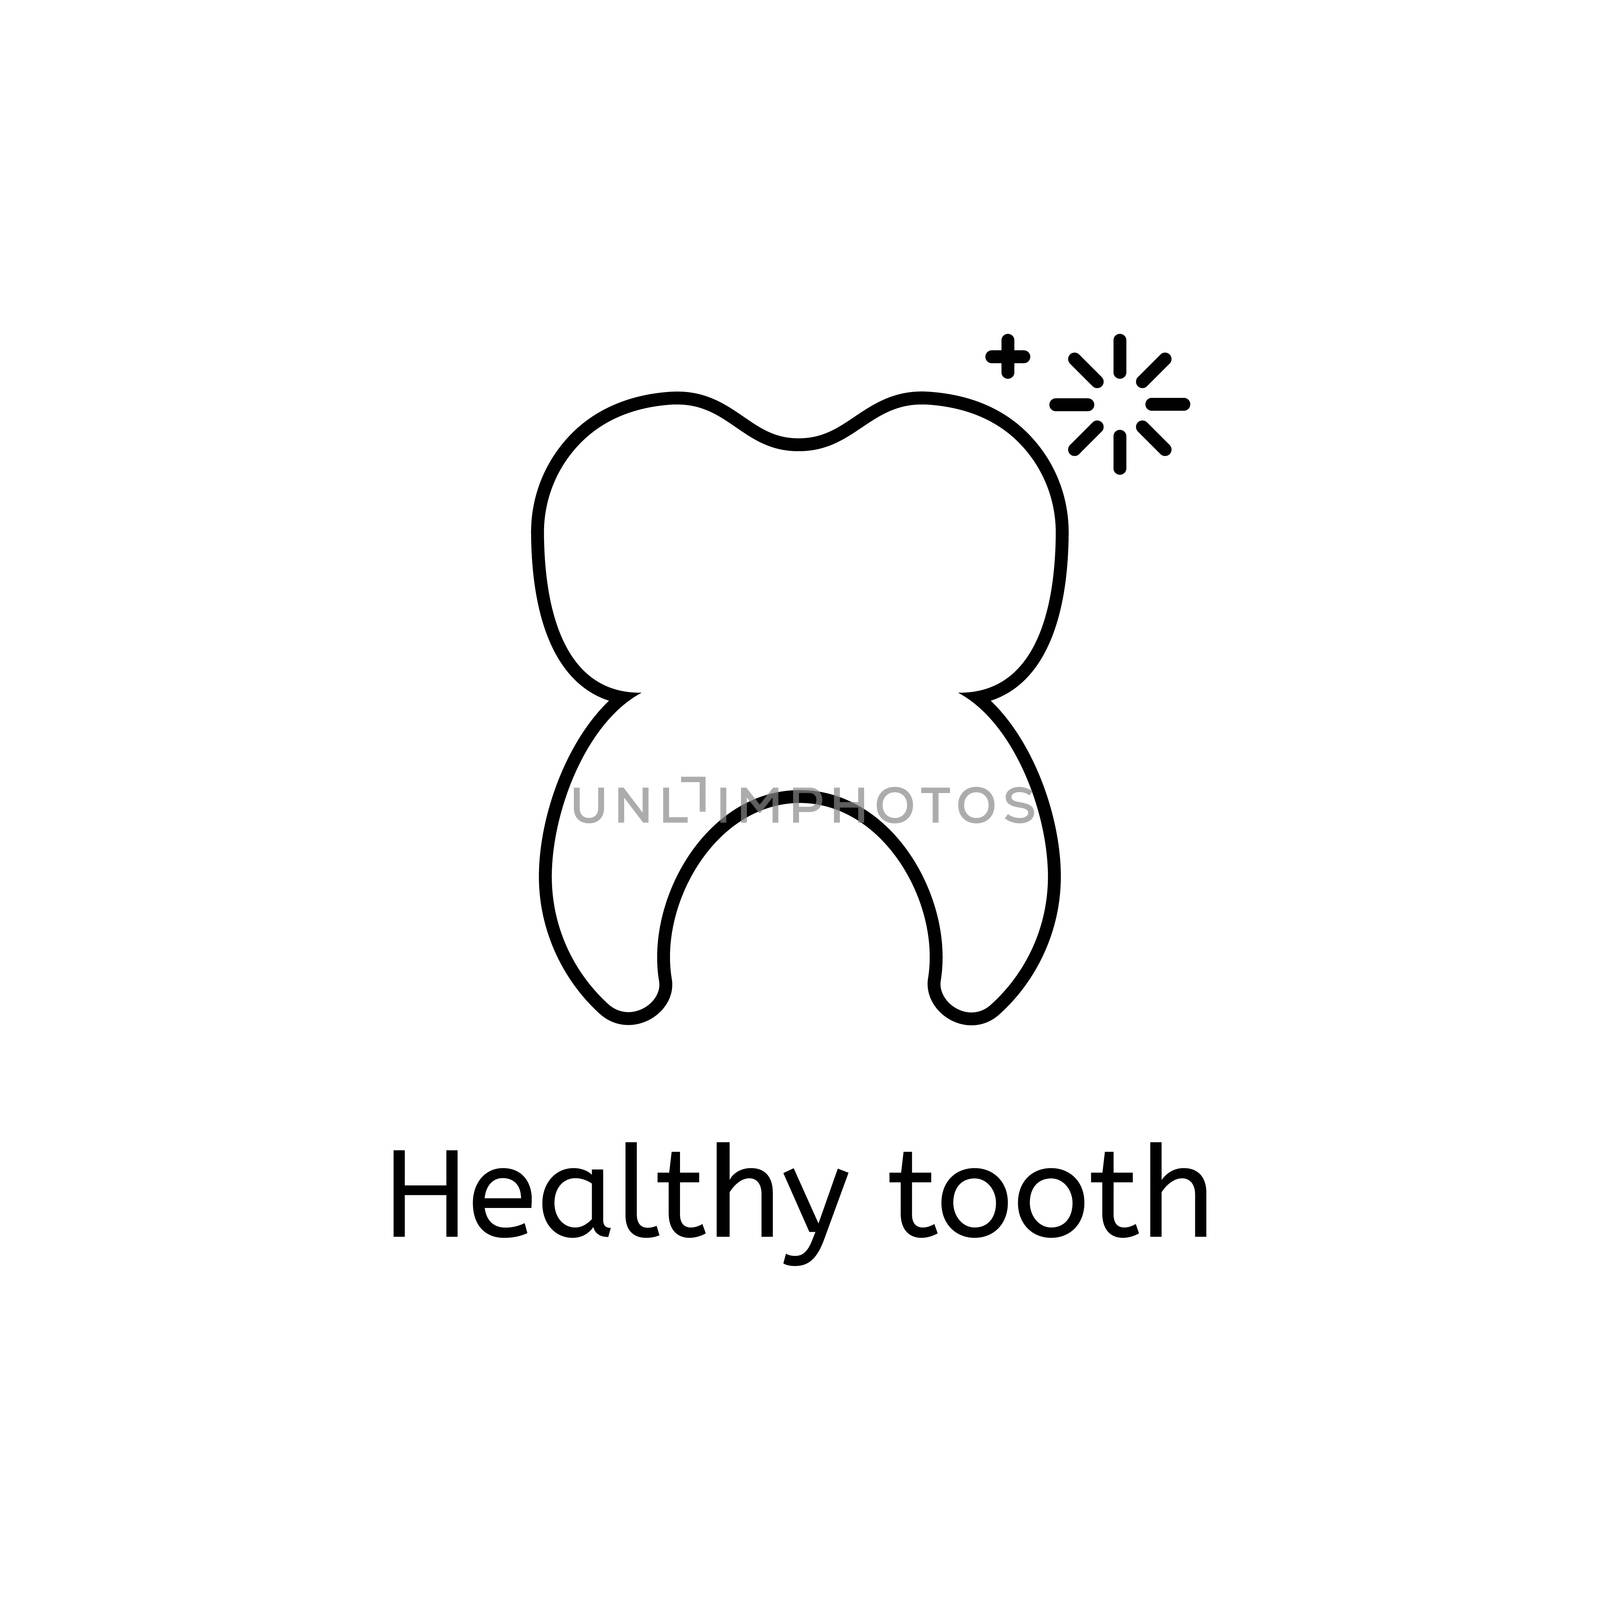  healthy tooth on a white background. by Elena_Garder